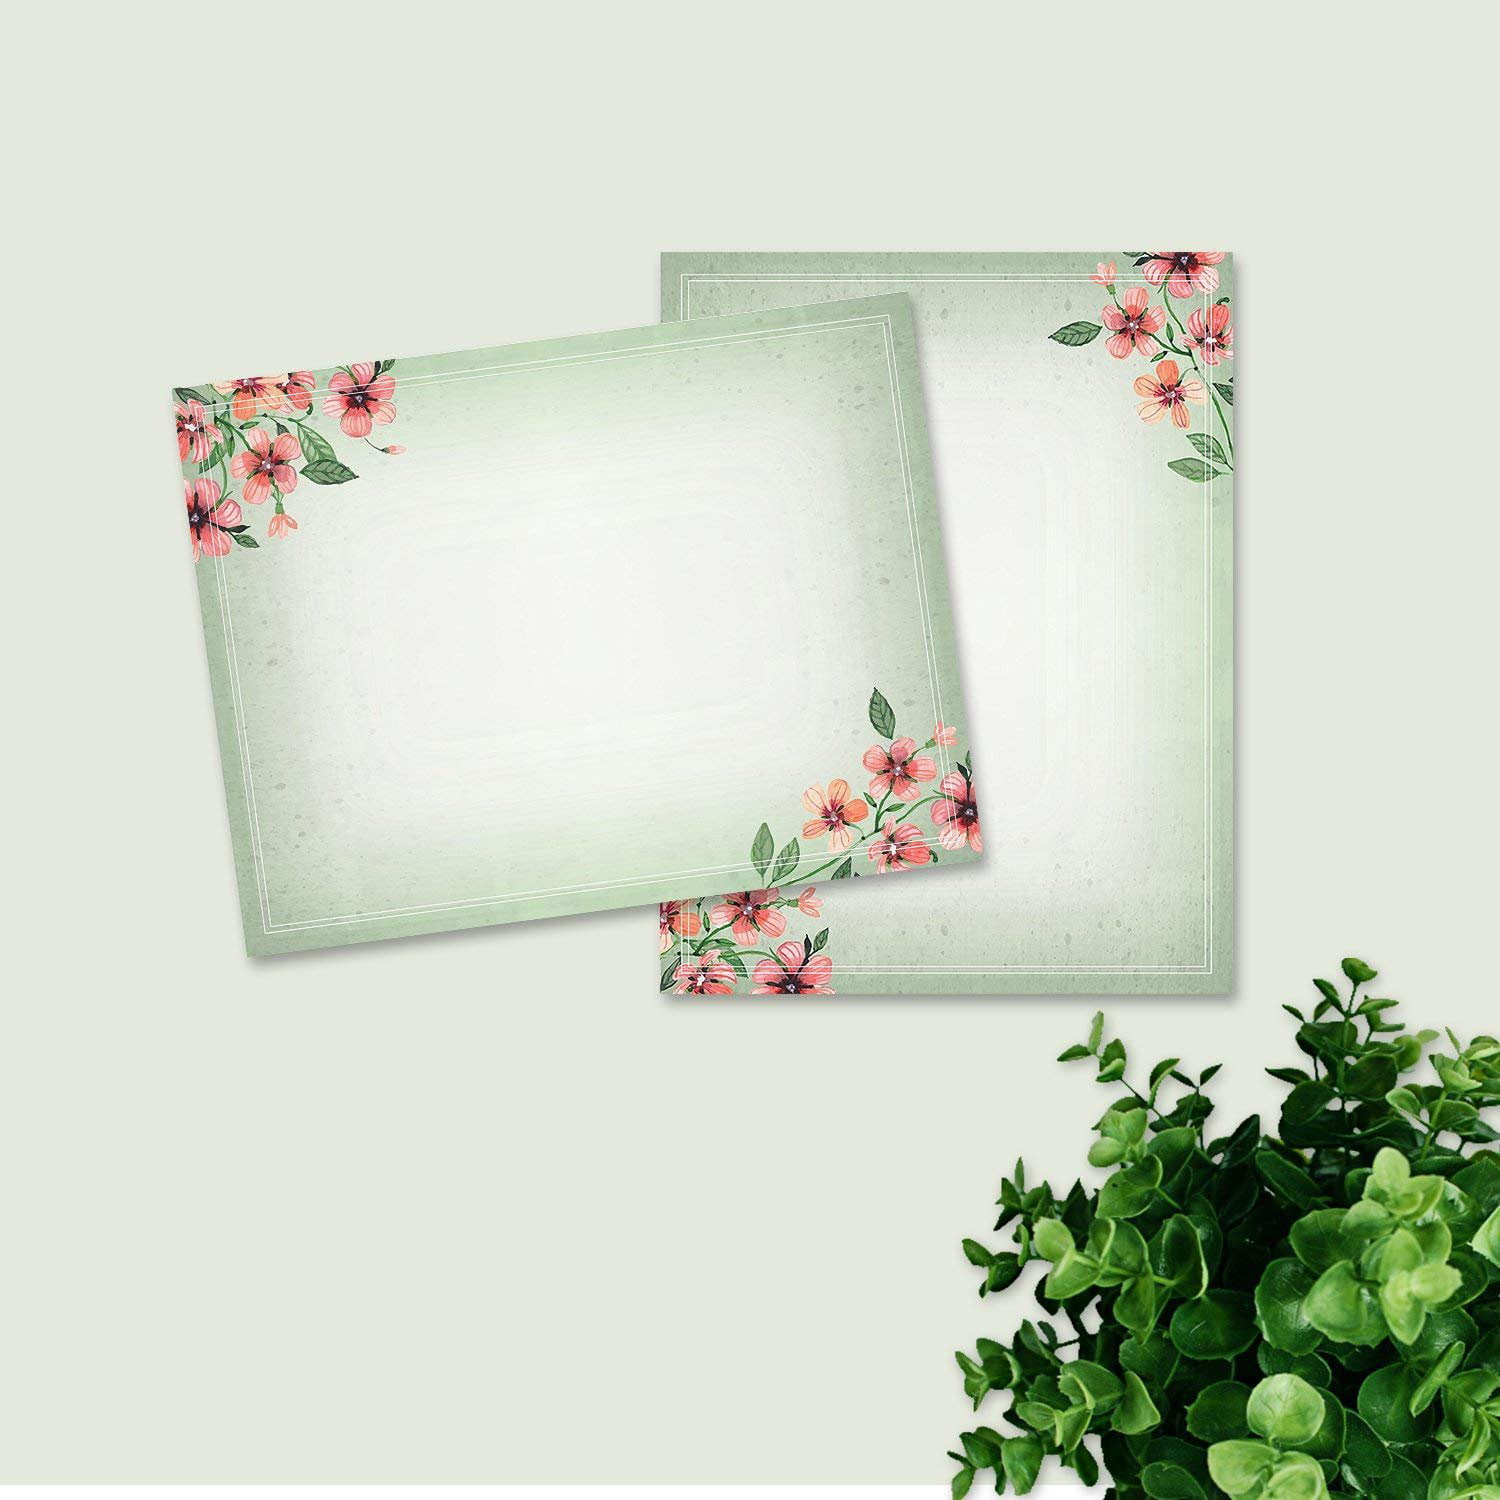 100 Stationery Writing Paper, with Cute Floral Designs Perfect for